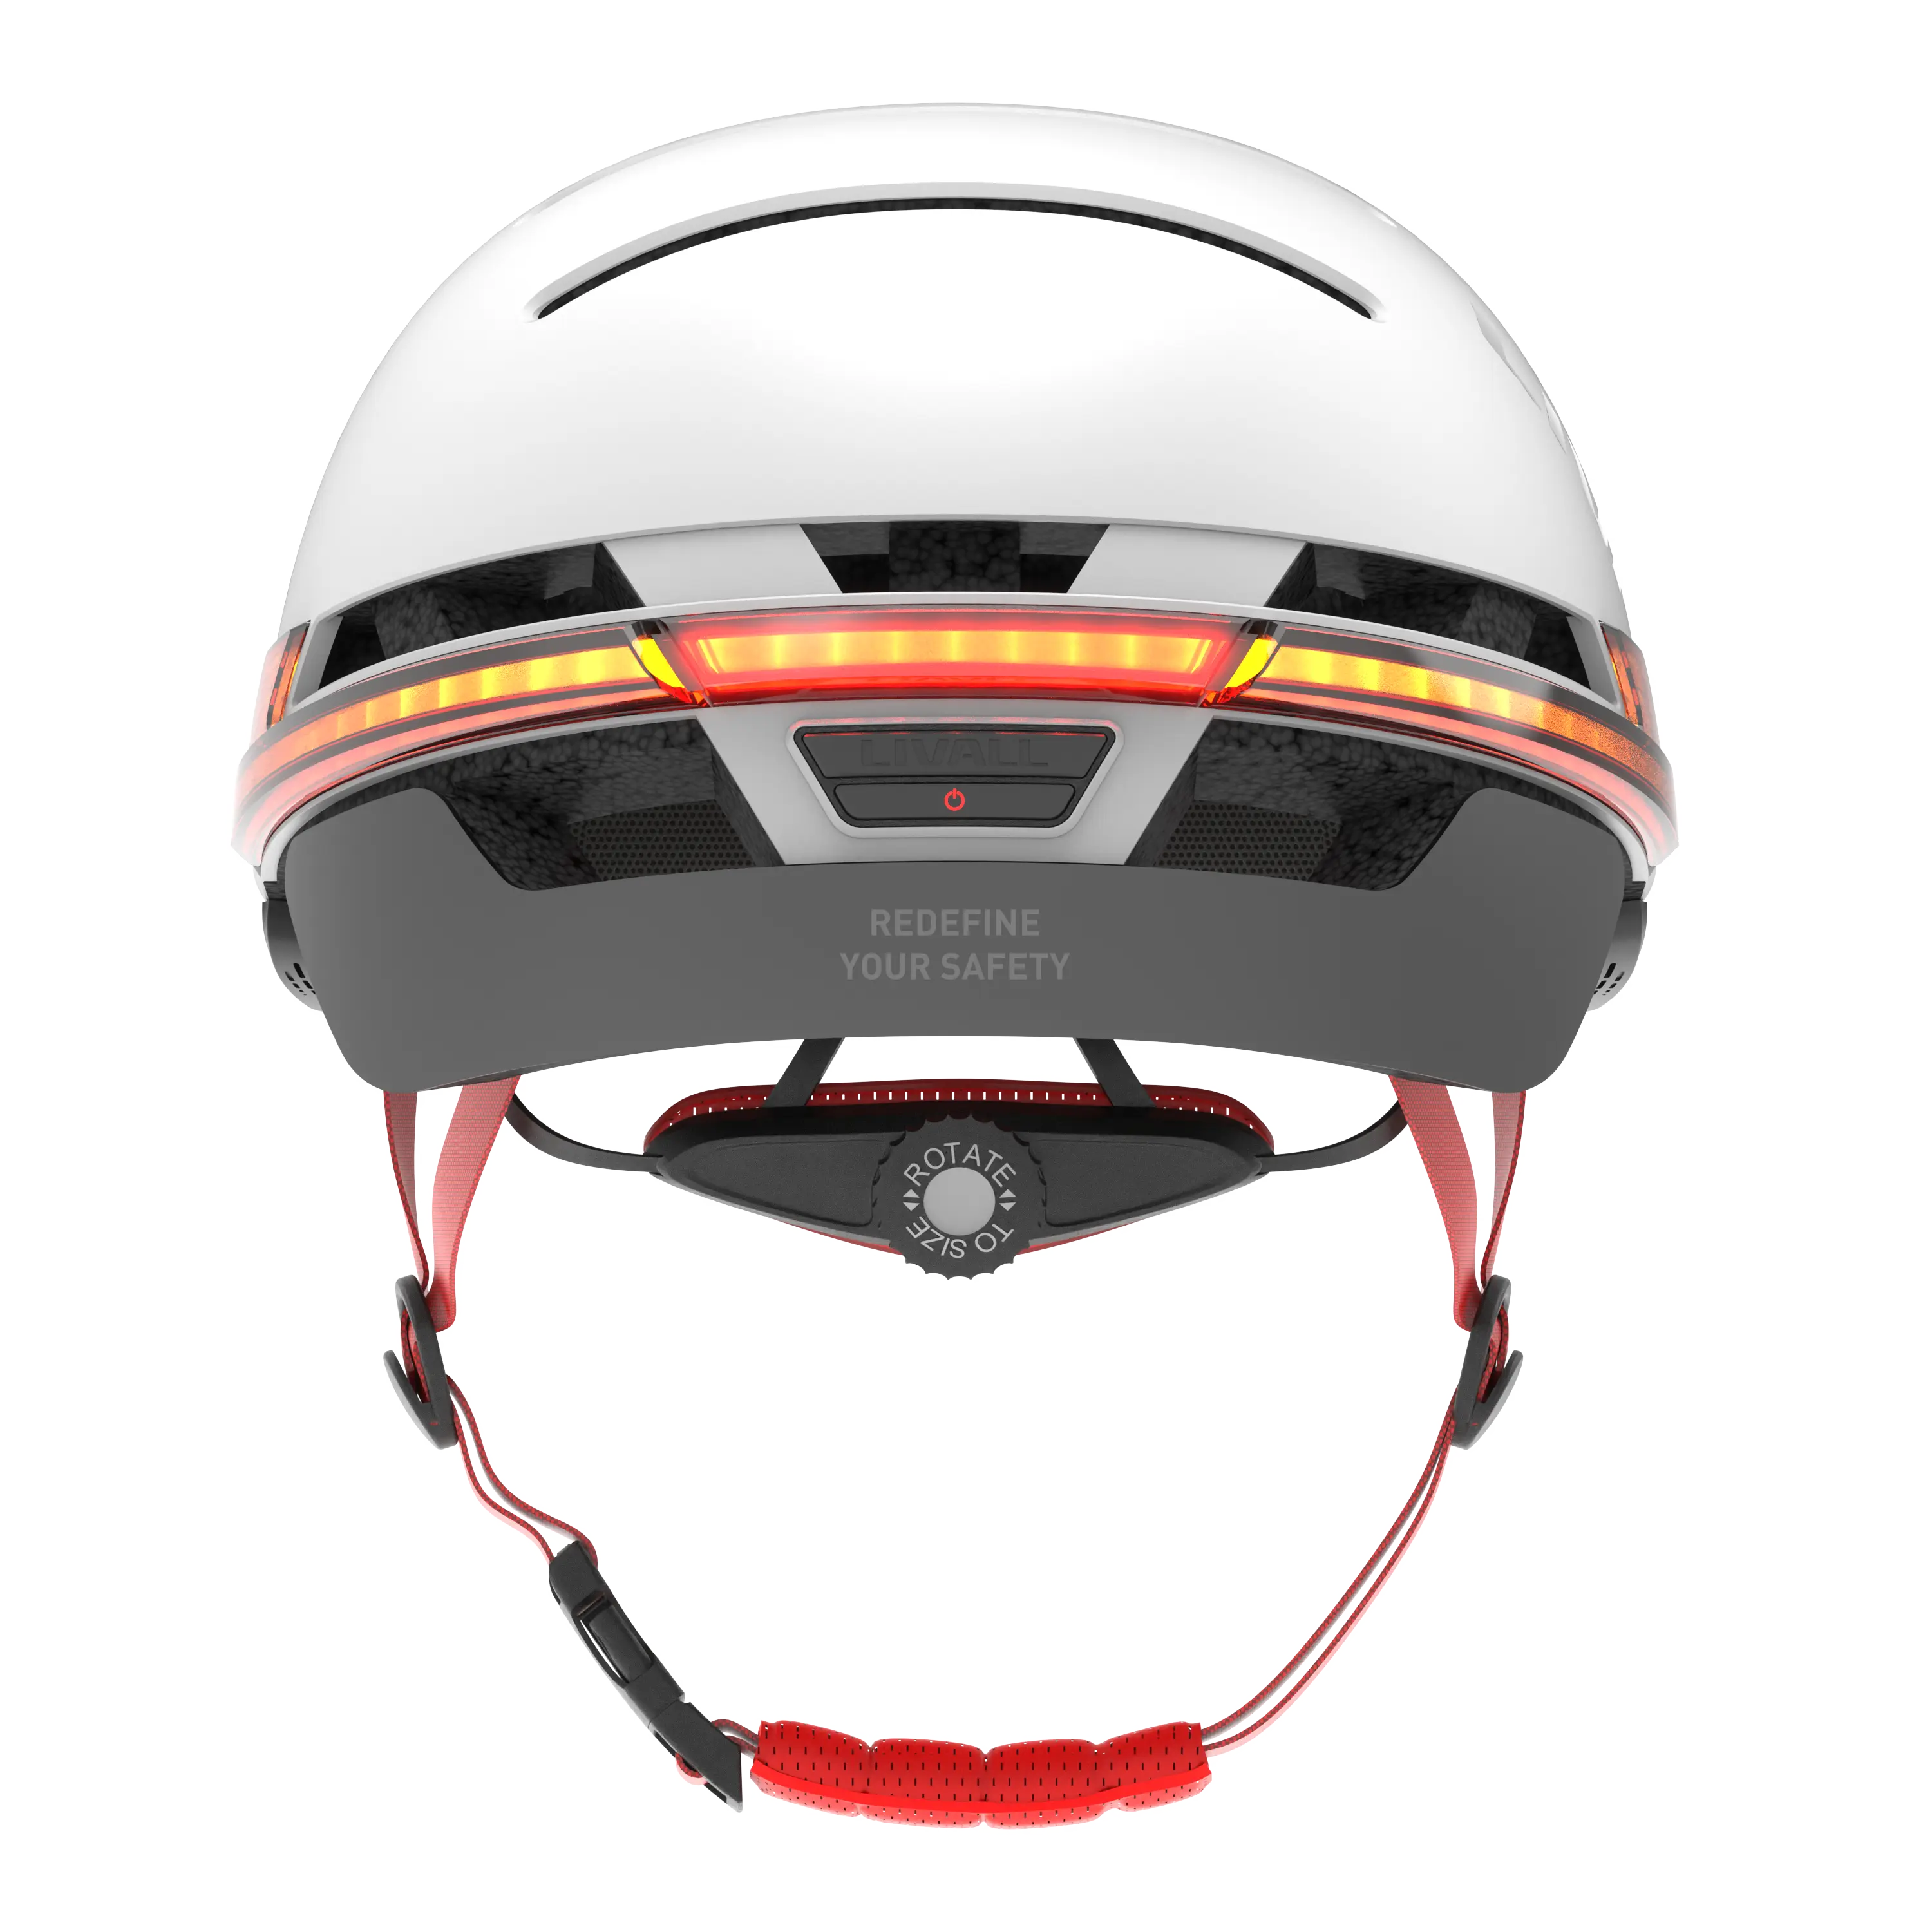 LIVALL Smart Helmet with JBL Sound for a Safe and Enjoyable Ride4